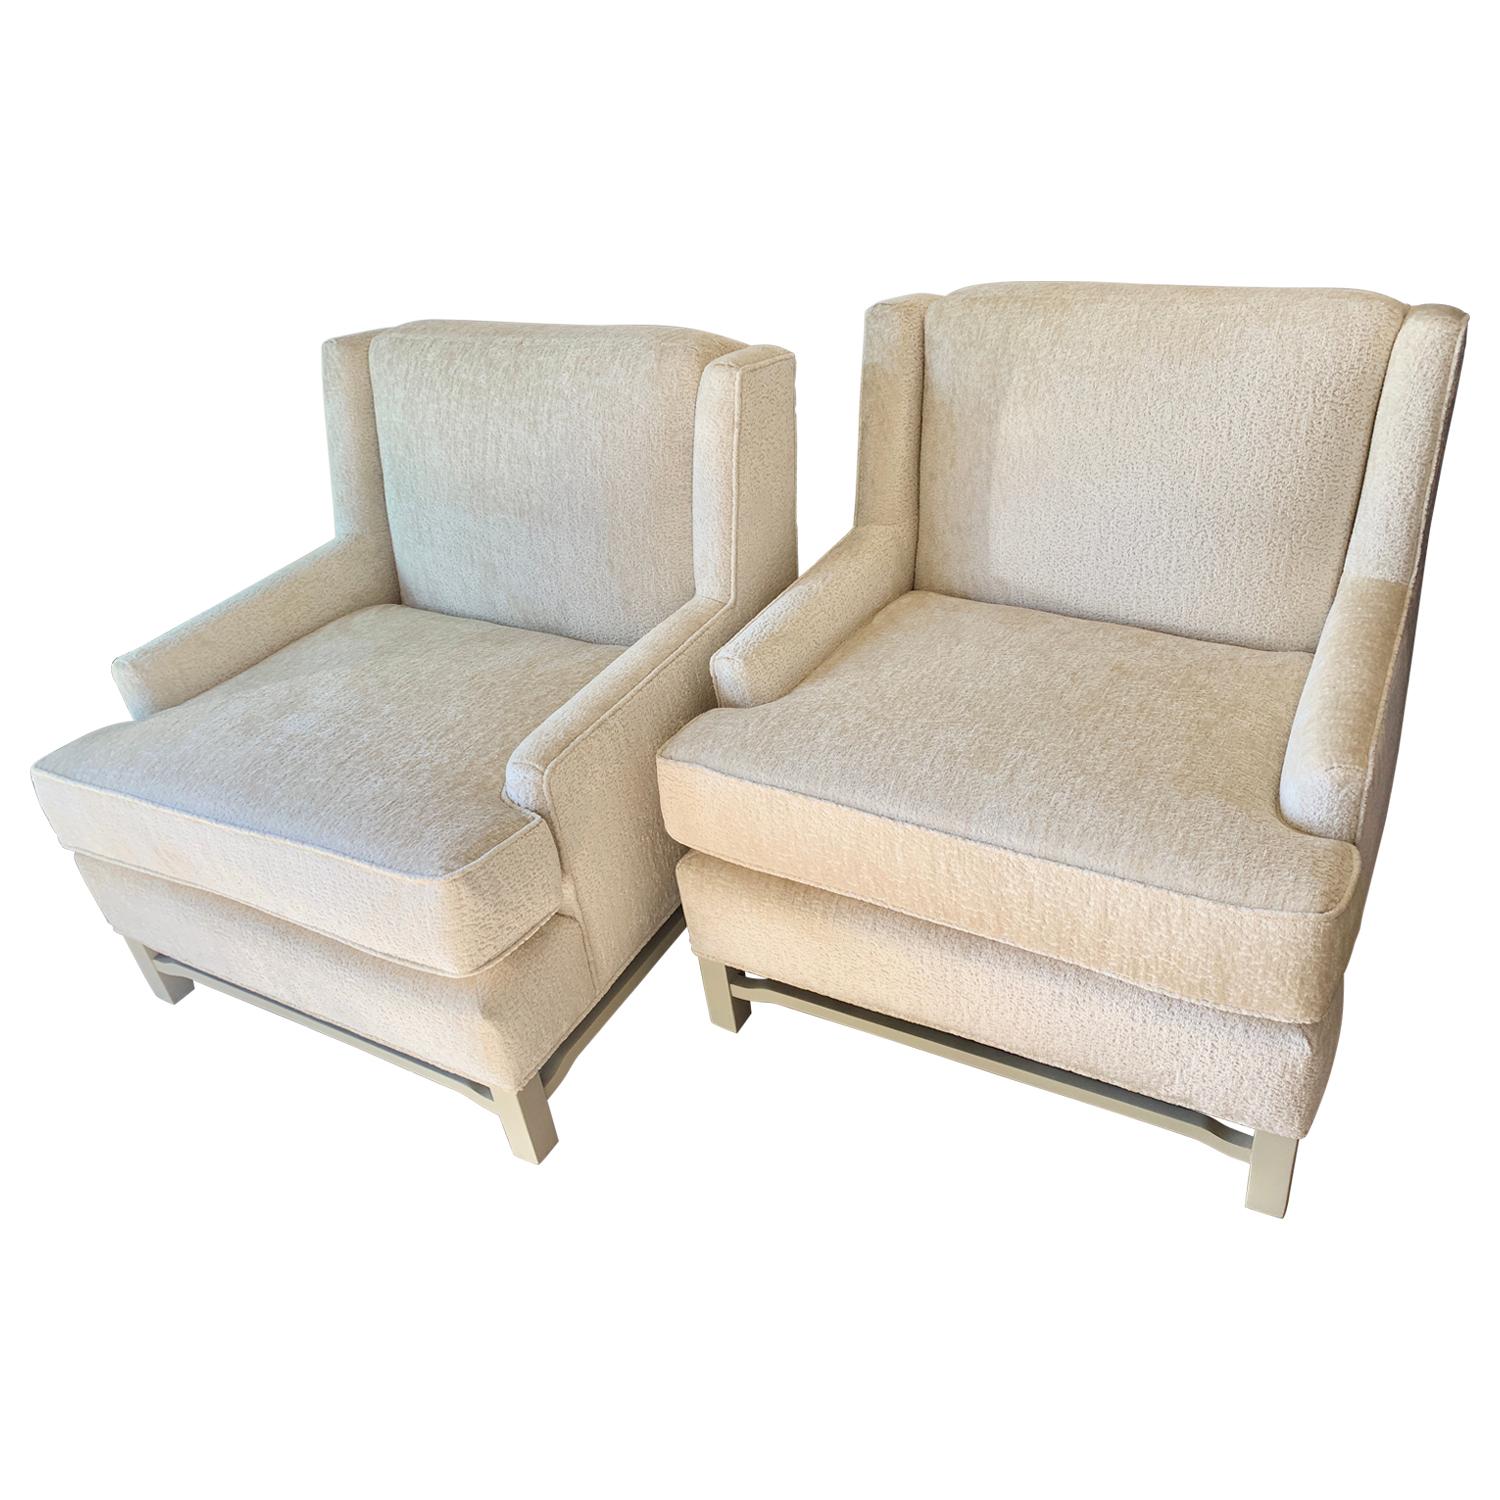 Pair of Midcentury Chairs in Bouclé Upholstery with Lacquered Wood Frame For Sale